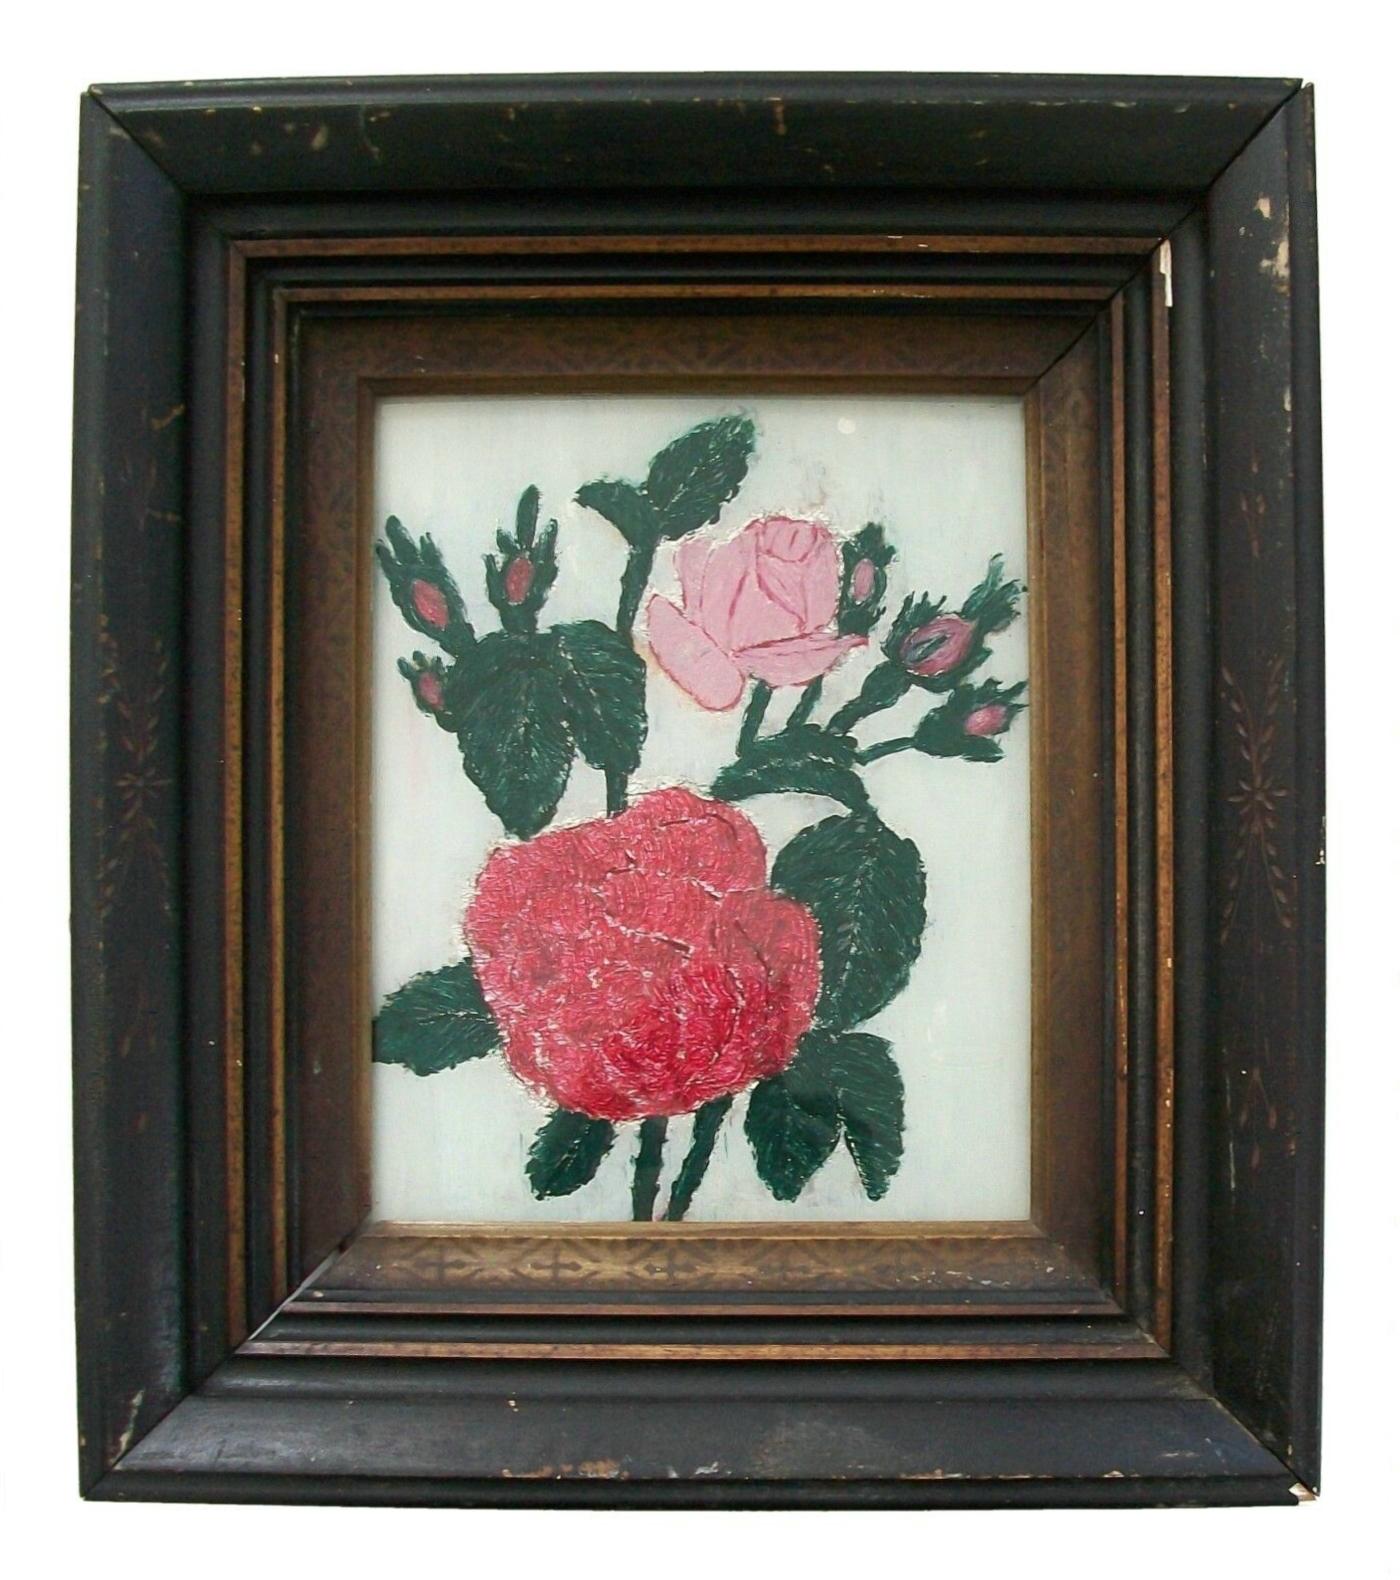 Exceptional Folk Art reverse painting on glass with foil/tinsel back (églomisé) - original hand made wood frame with carved and painted details - unsigned - United States - circa 1850's. 

Good antique condition - grime with minor loss and numerous